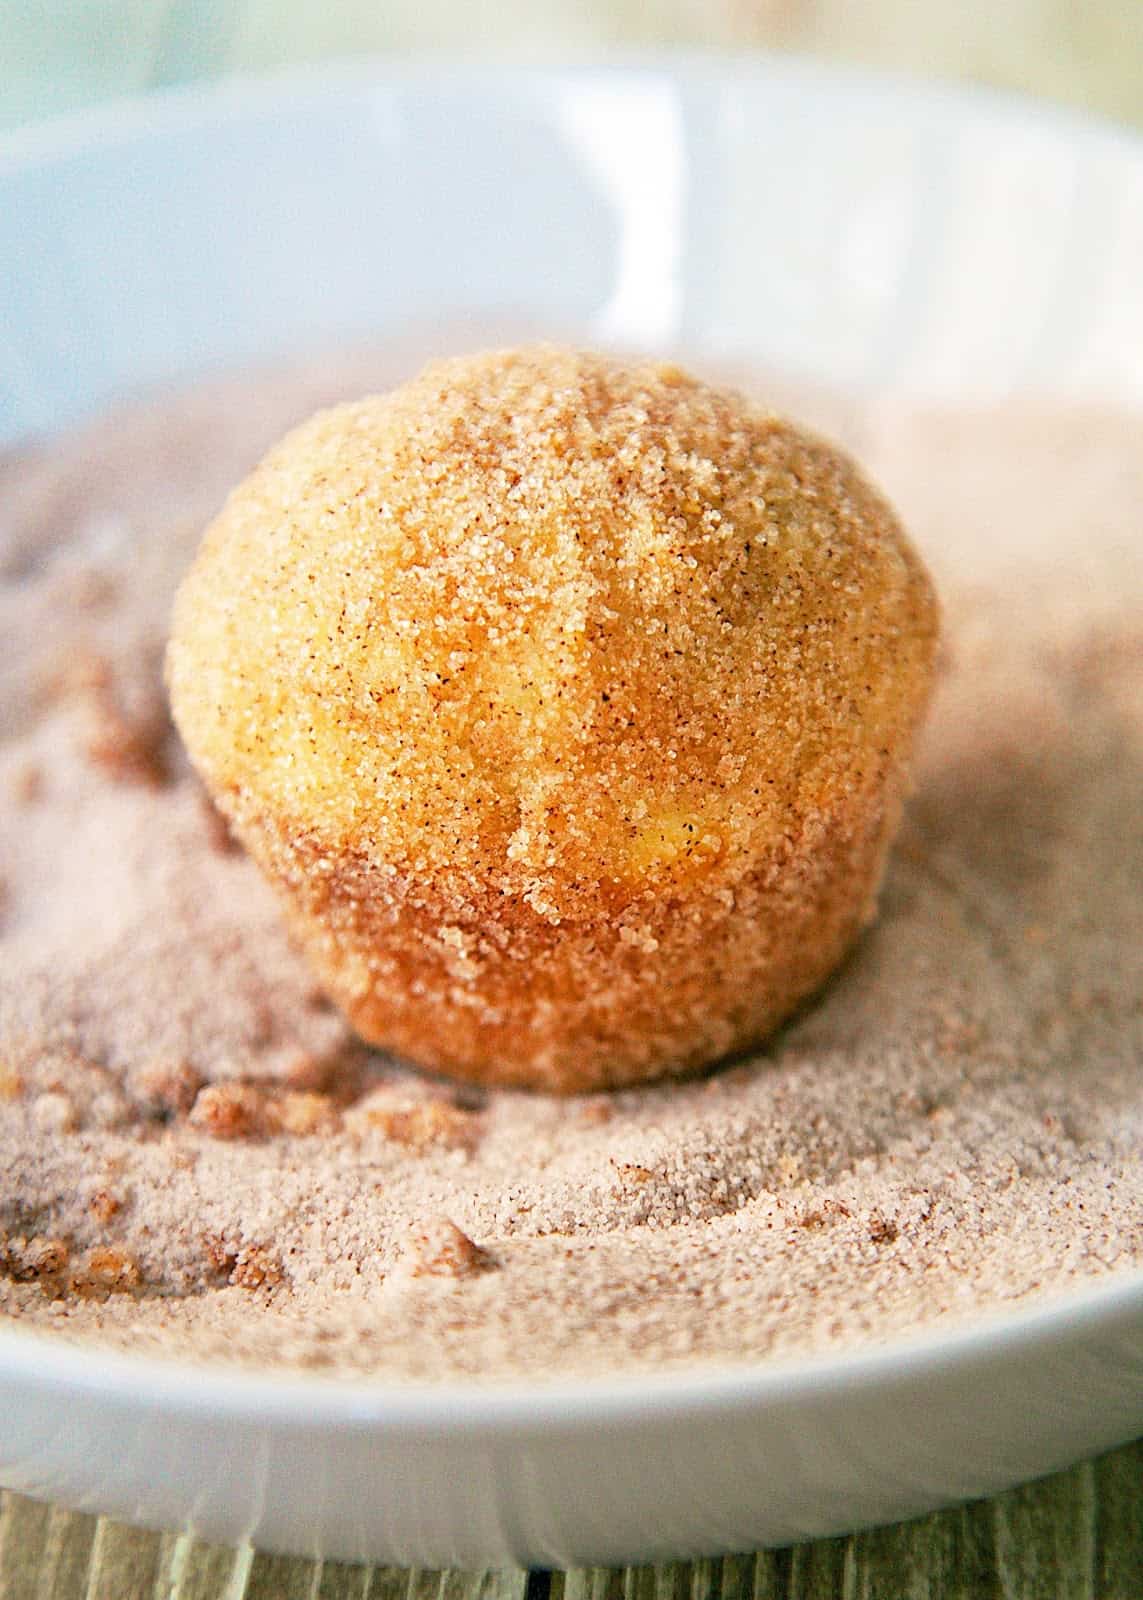 Cinnamon-Sugar Doughnut Muffins Recipe - baked doughnut muffins coated in cinnamon and sugar - tastes just like an old-fashioned doughnut! Great for Mother's Day breakfast!